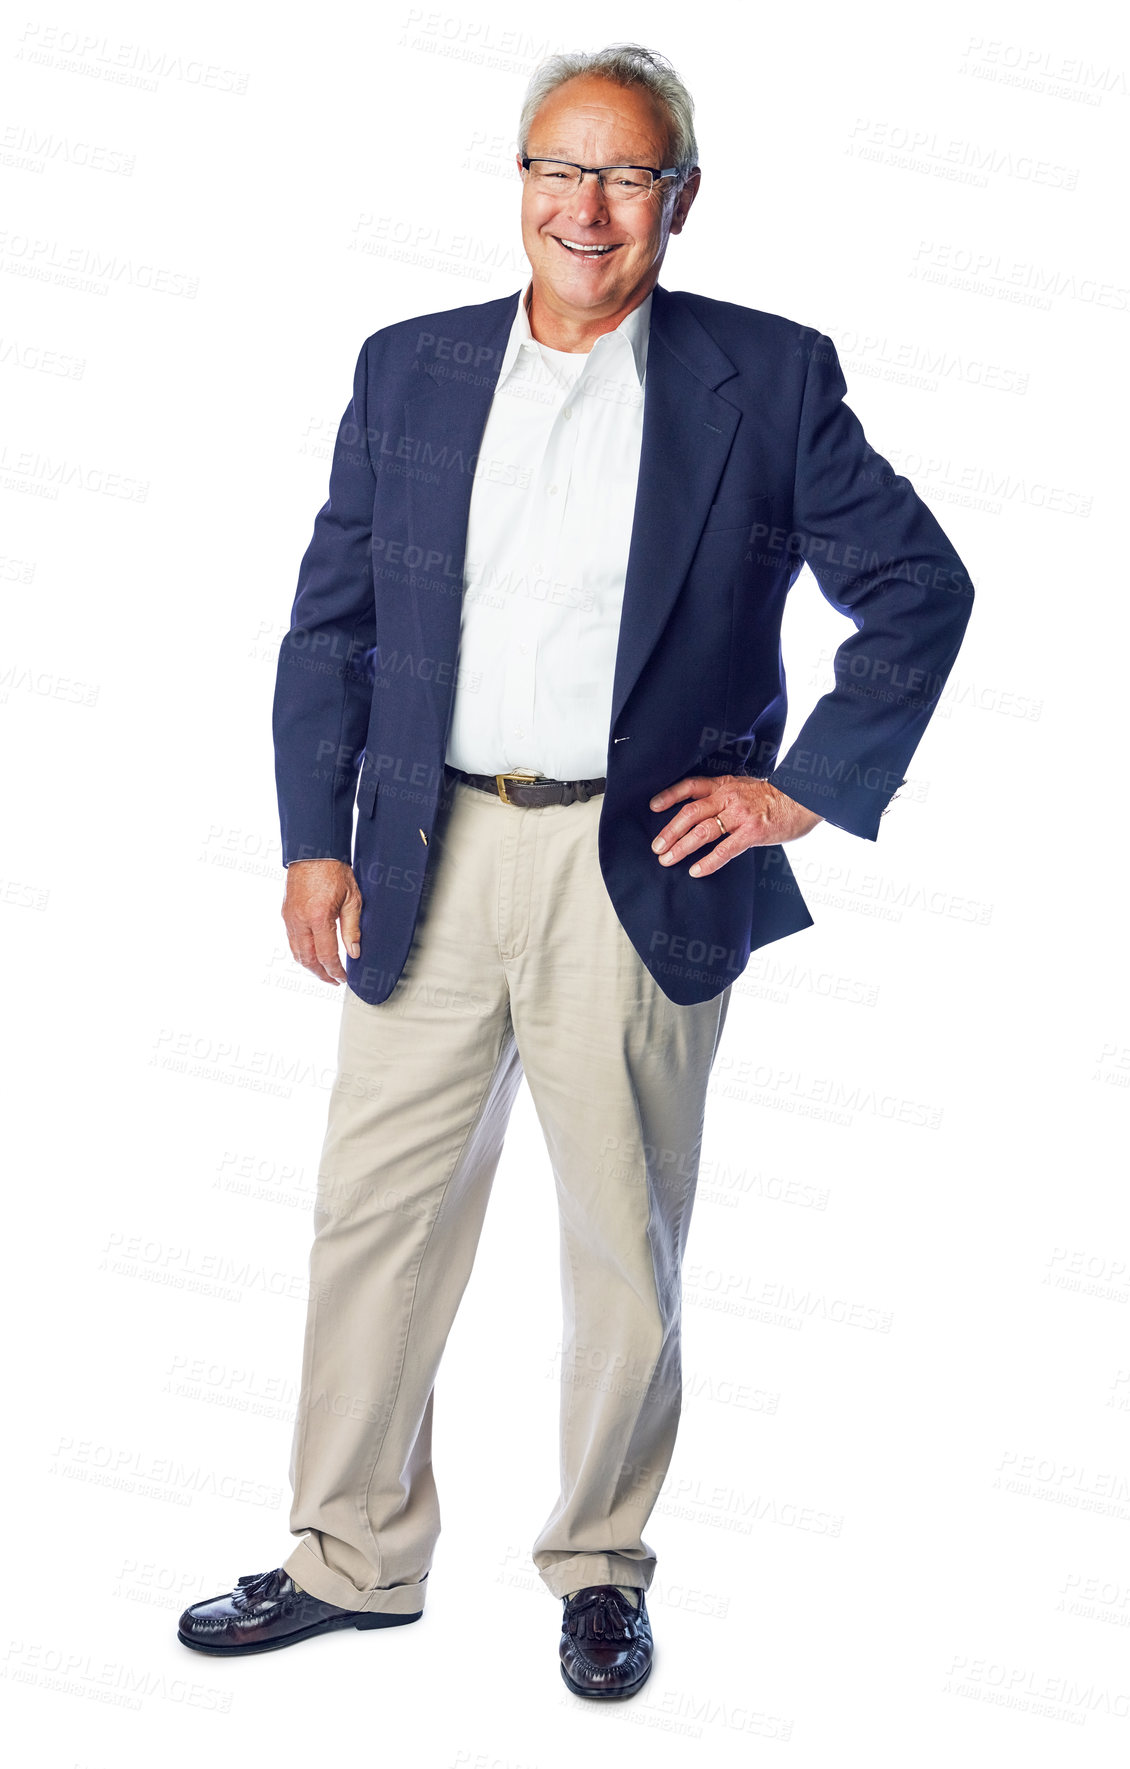 Buy stock photo Proud senior and manager full body portrait smiling with confident, happy and corporate pose. Mature, professional and elderly businessman with smile standing at isolated white background.

